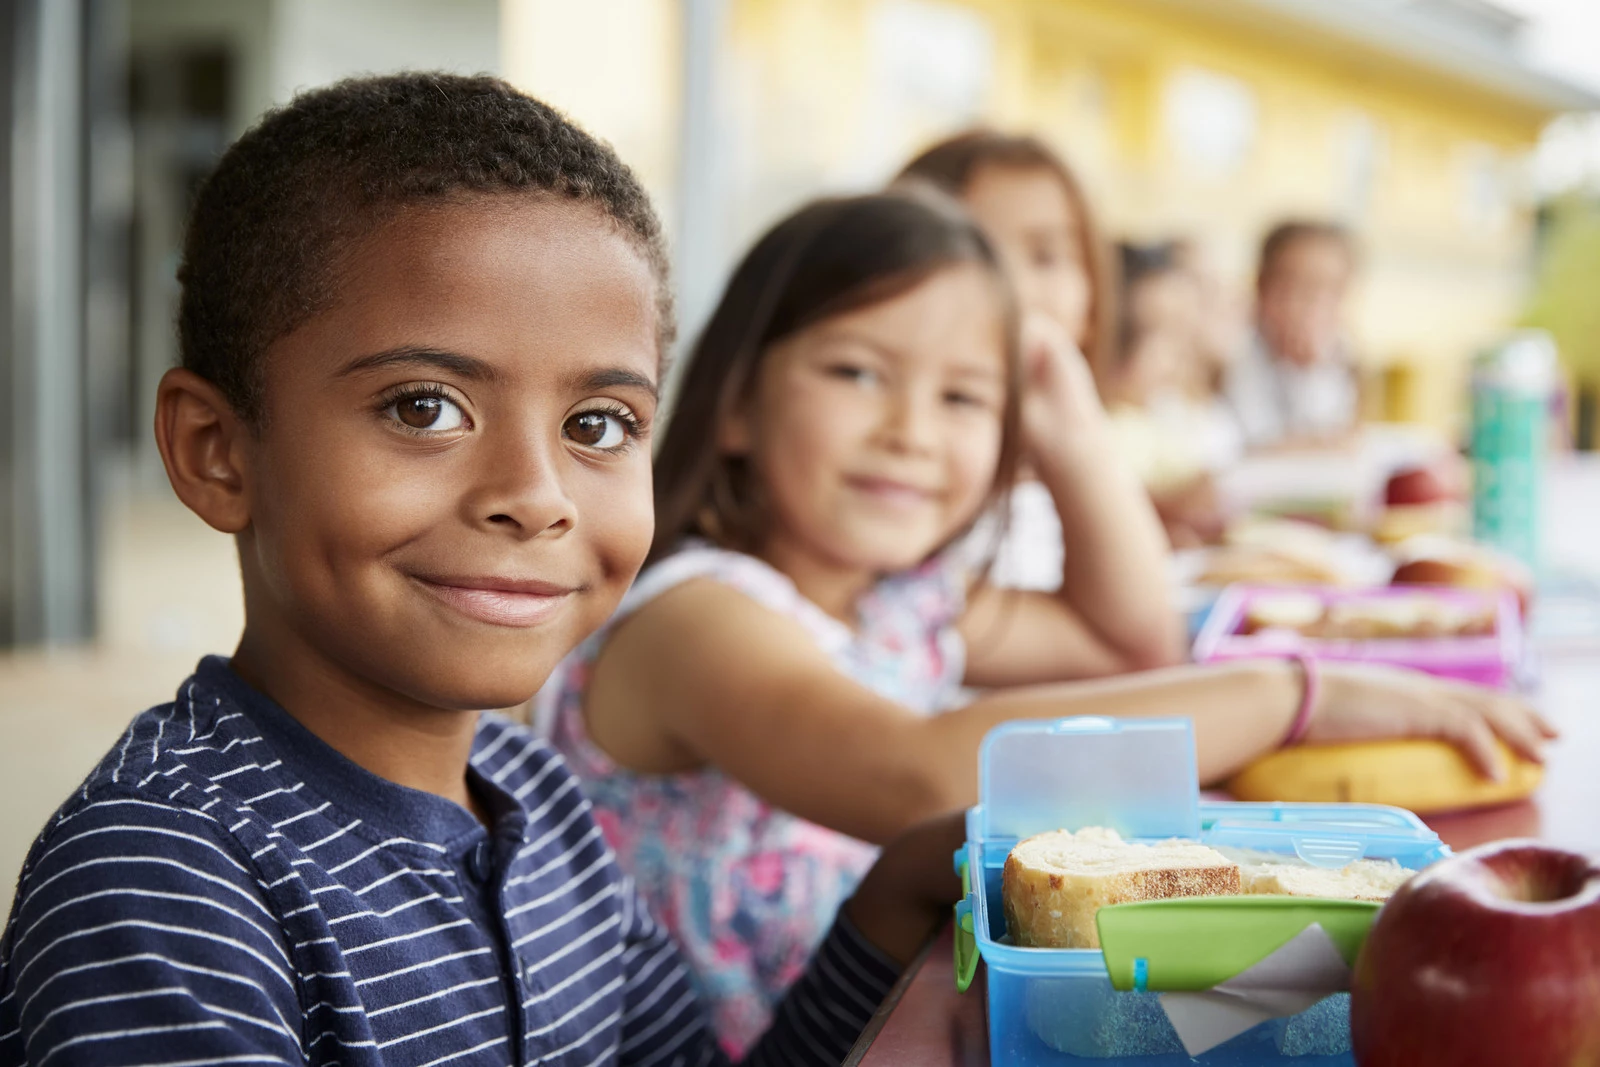 Federal Universal Free School Lunch Program to End this Summer